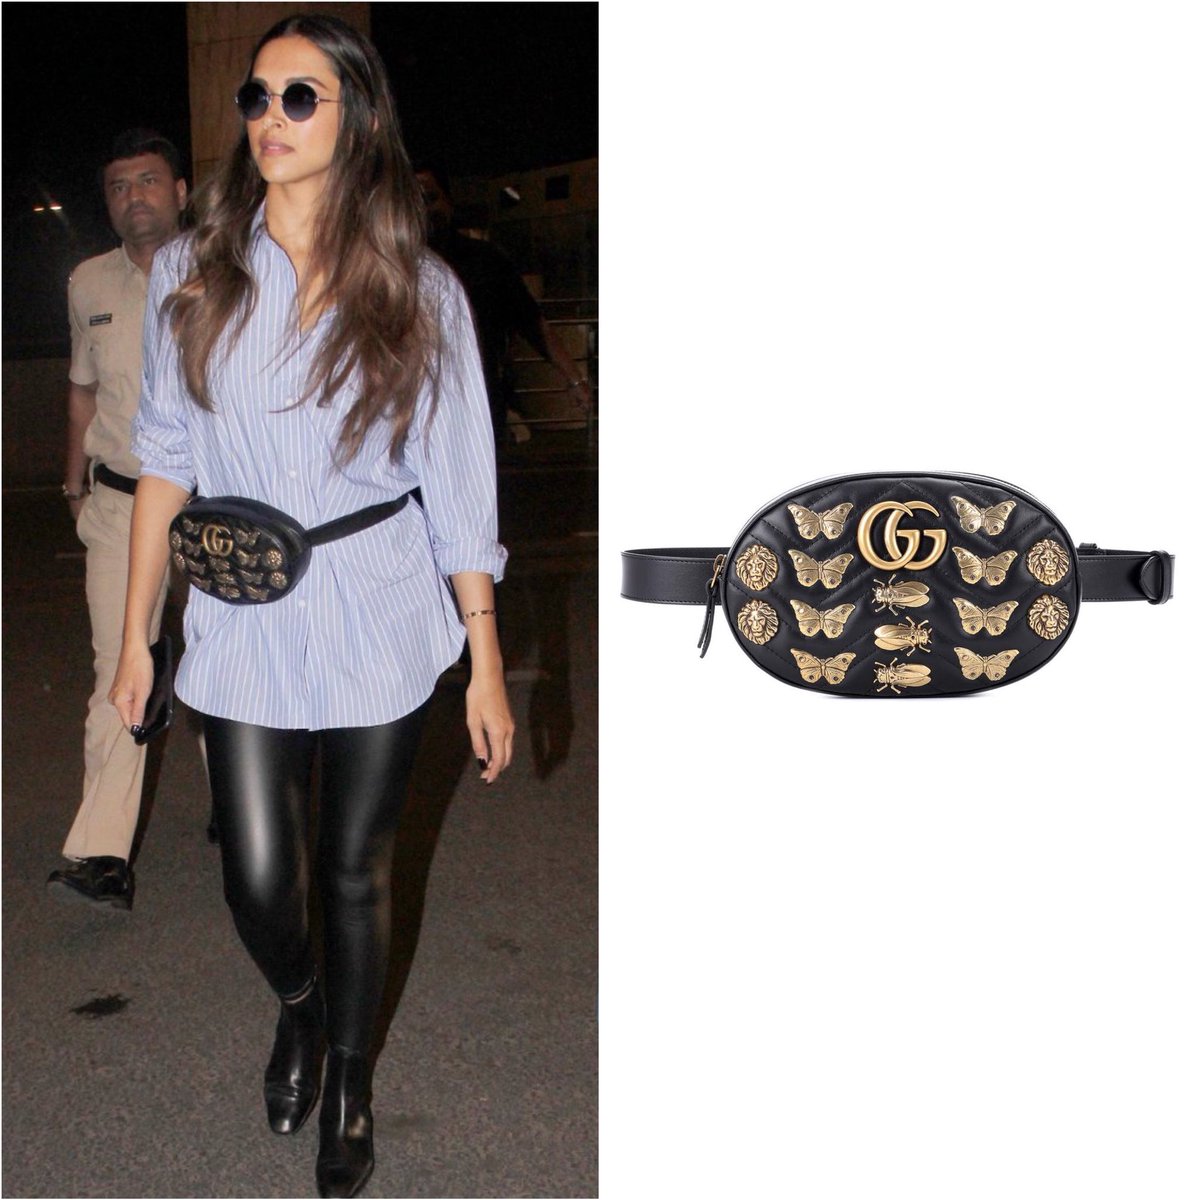 A Fashionistas Diary on Twitter: "@deepikapadukone rocks a @gucci belt bag  while at the airport #bollywood #style #fashion #beauty #bollywoodstyle  #bollywoodfashion #indianfashion #celebstyle #celebrityfashion #indianstyle  #afashionistasdiaries ...